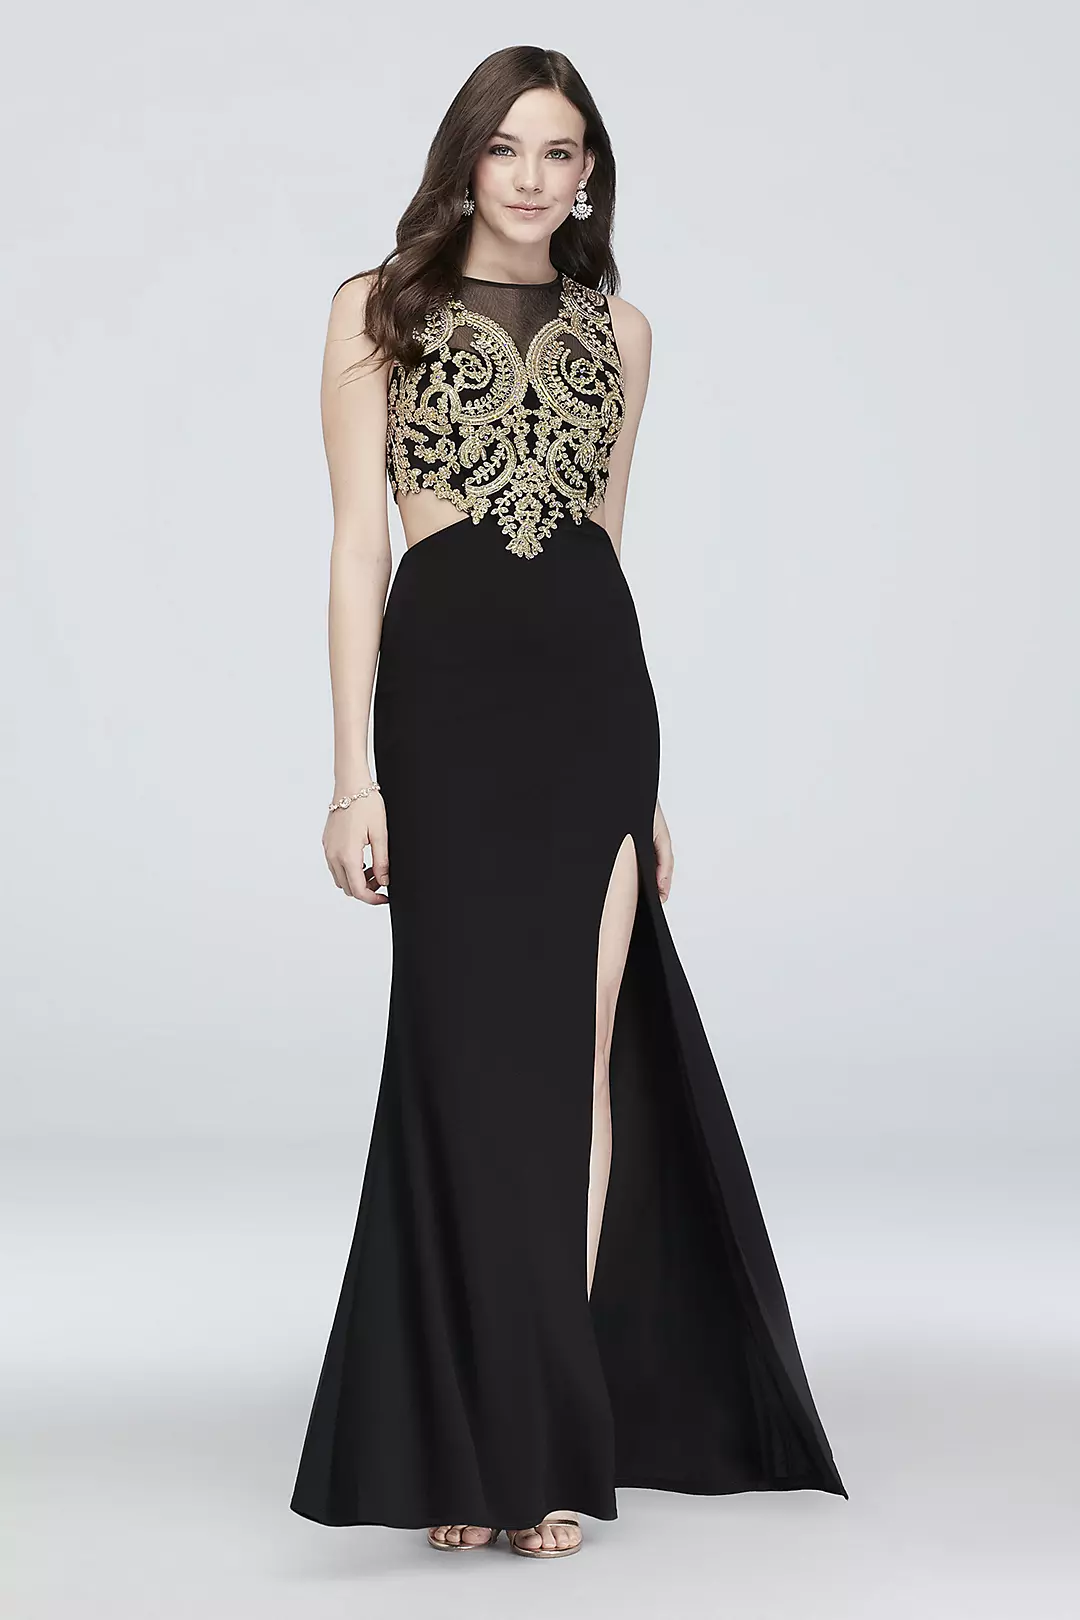 Illusion Embellished Brocade Gown with Cutouts Image